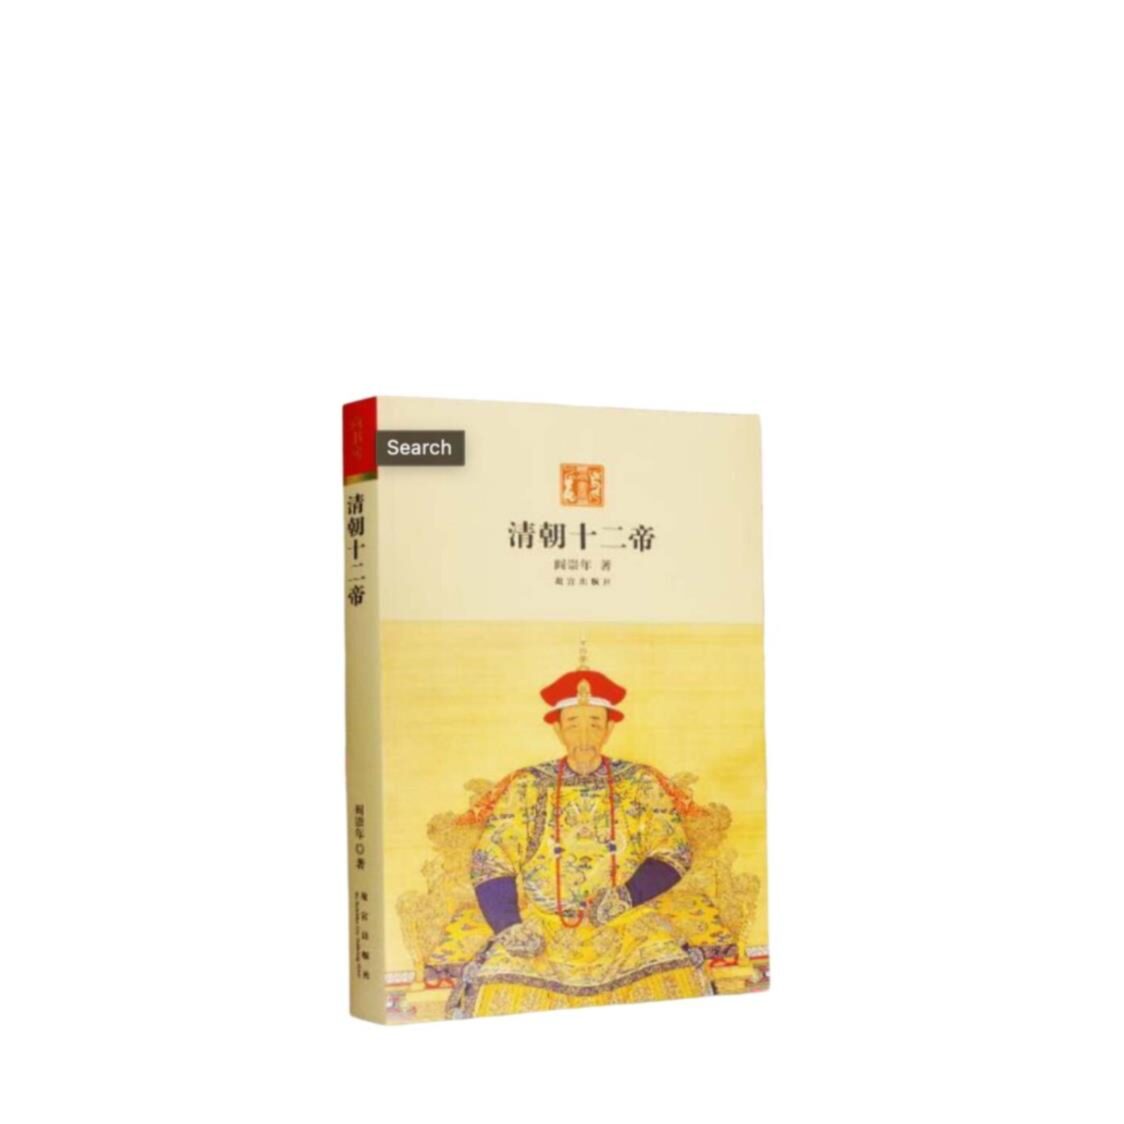 Xuan Culture  Lifestyle Twelve Emperor of Qing Dynasty Book